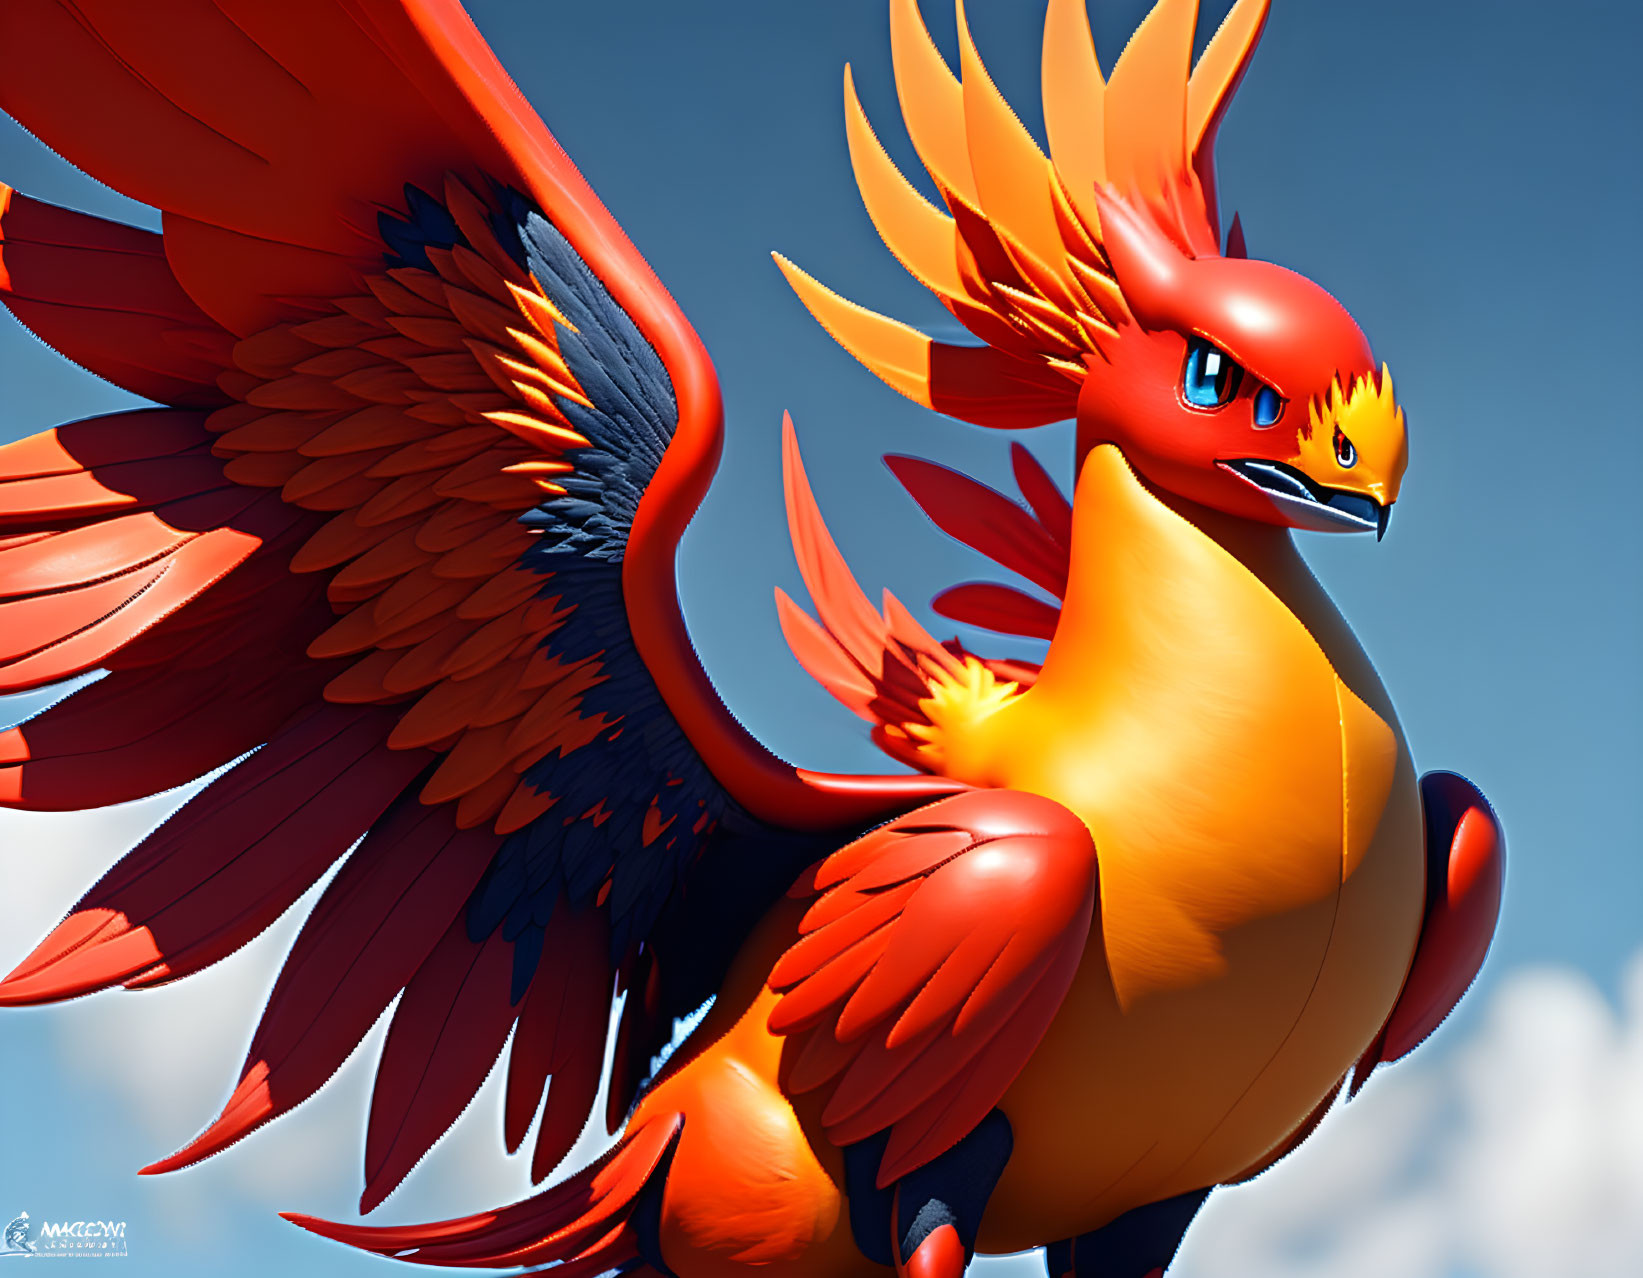 Colorful Phoenix Illustration with Majestic Wings and Intense Gaze